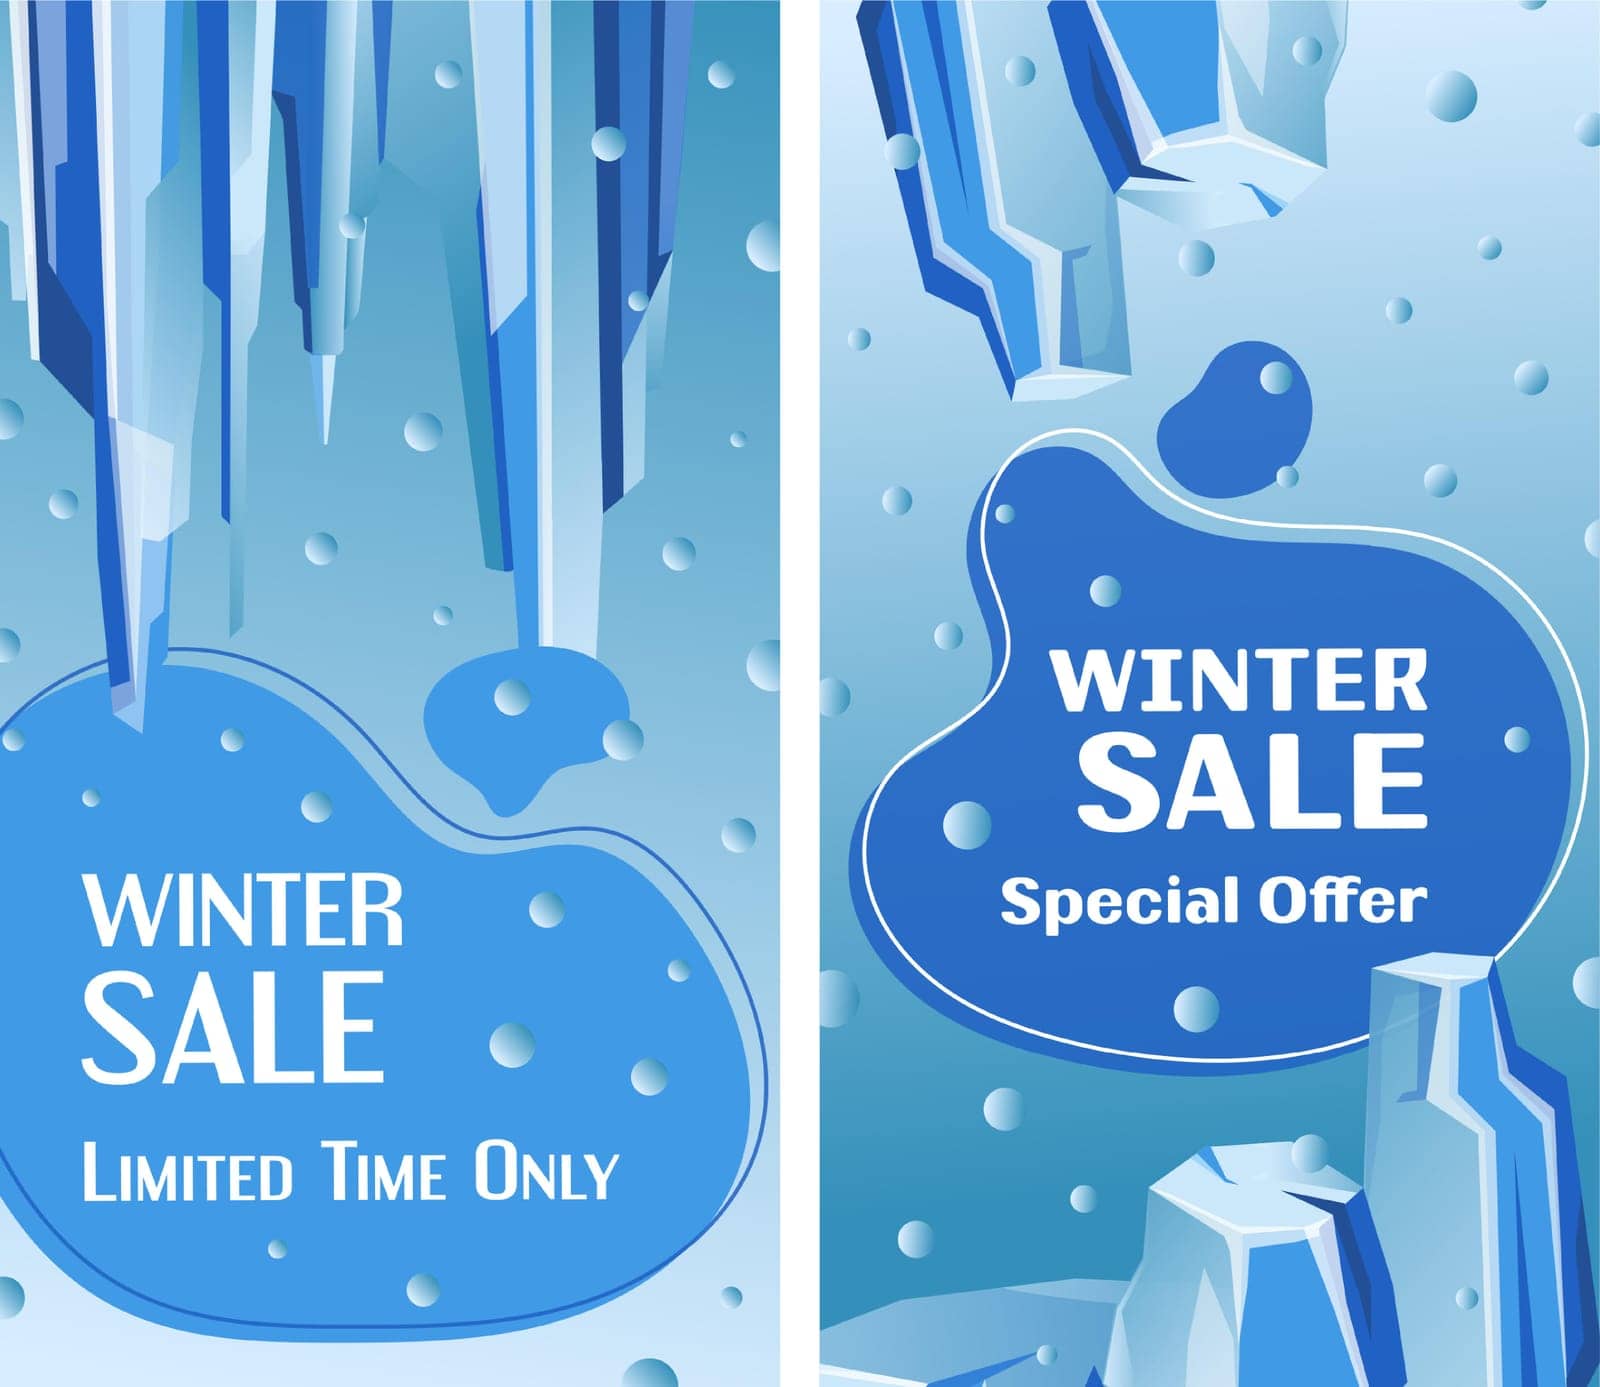 Special offer for clients on winter sale, limited time only reduction of prices and costs for customers. Ice and snow landscape with icebergs and cubes, seasonal promotion. Vector in flat style